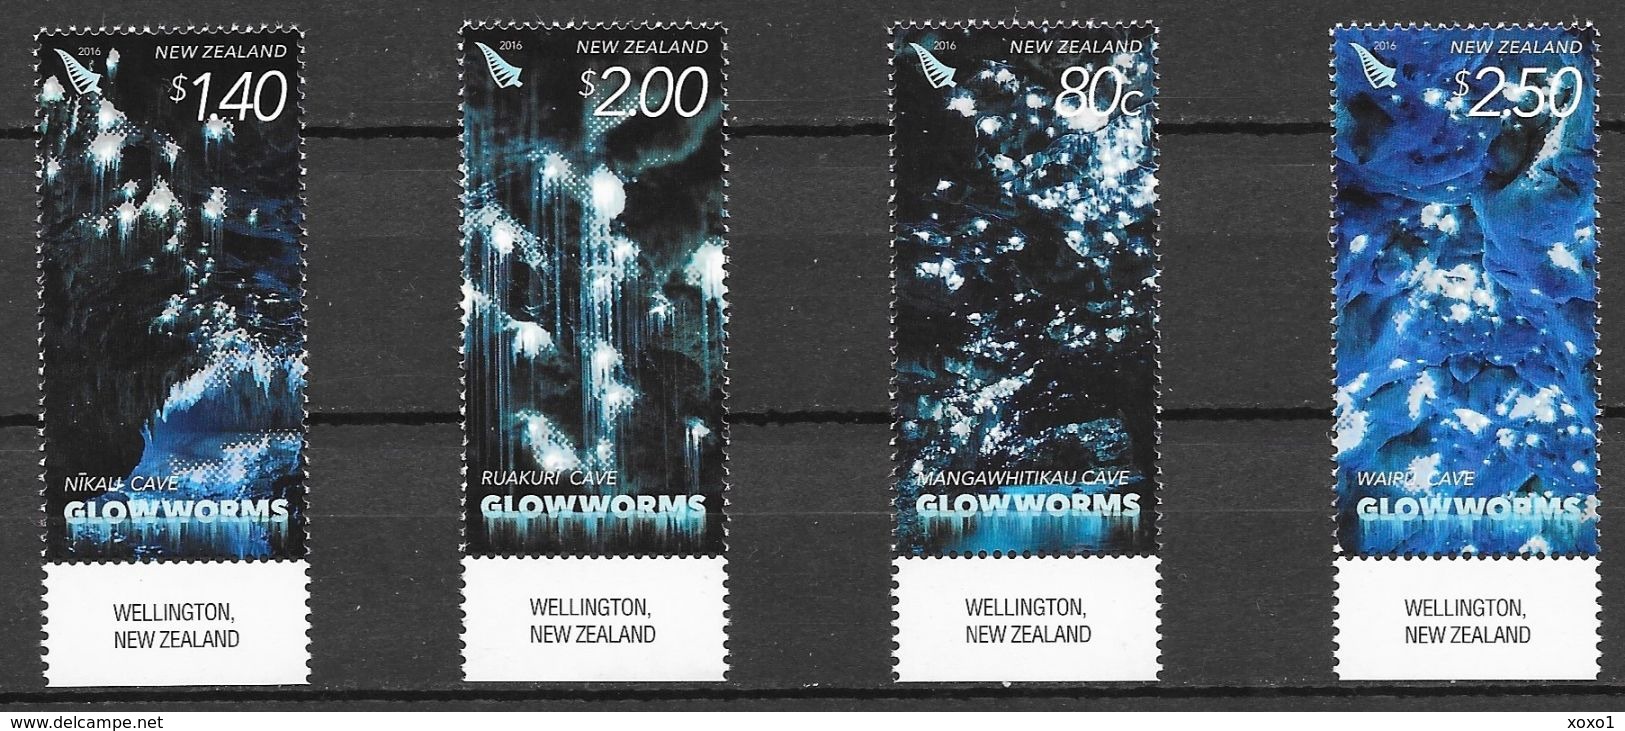 NEW ZEALAND 2016 MiNr. 3316 - 3319  Neuseeland Caves INSECTS Fungus Gnats Glowworms 4v  MNH ** 8.50 € - Neufs